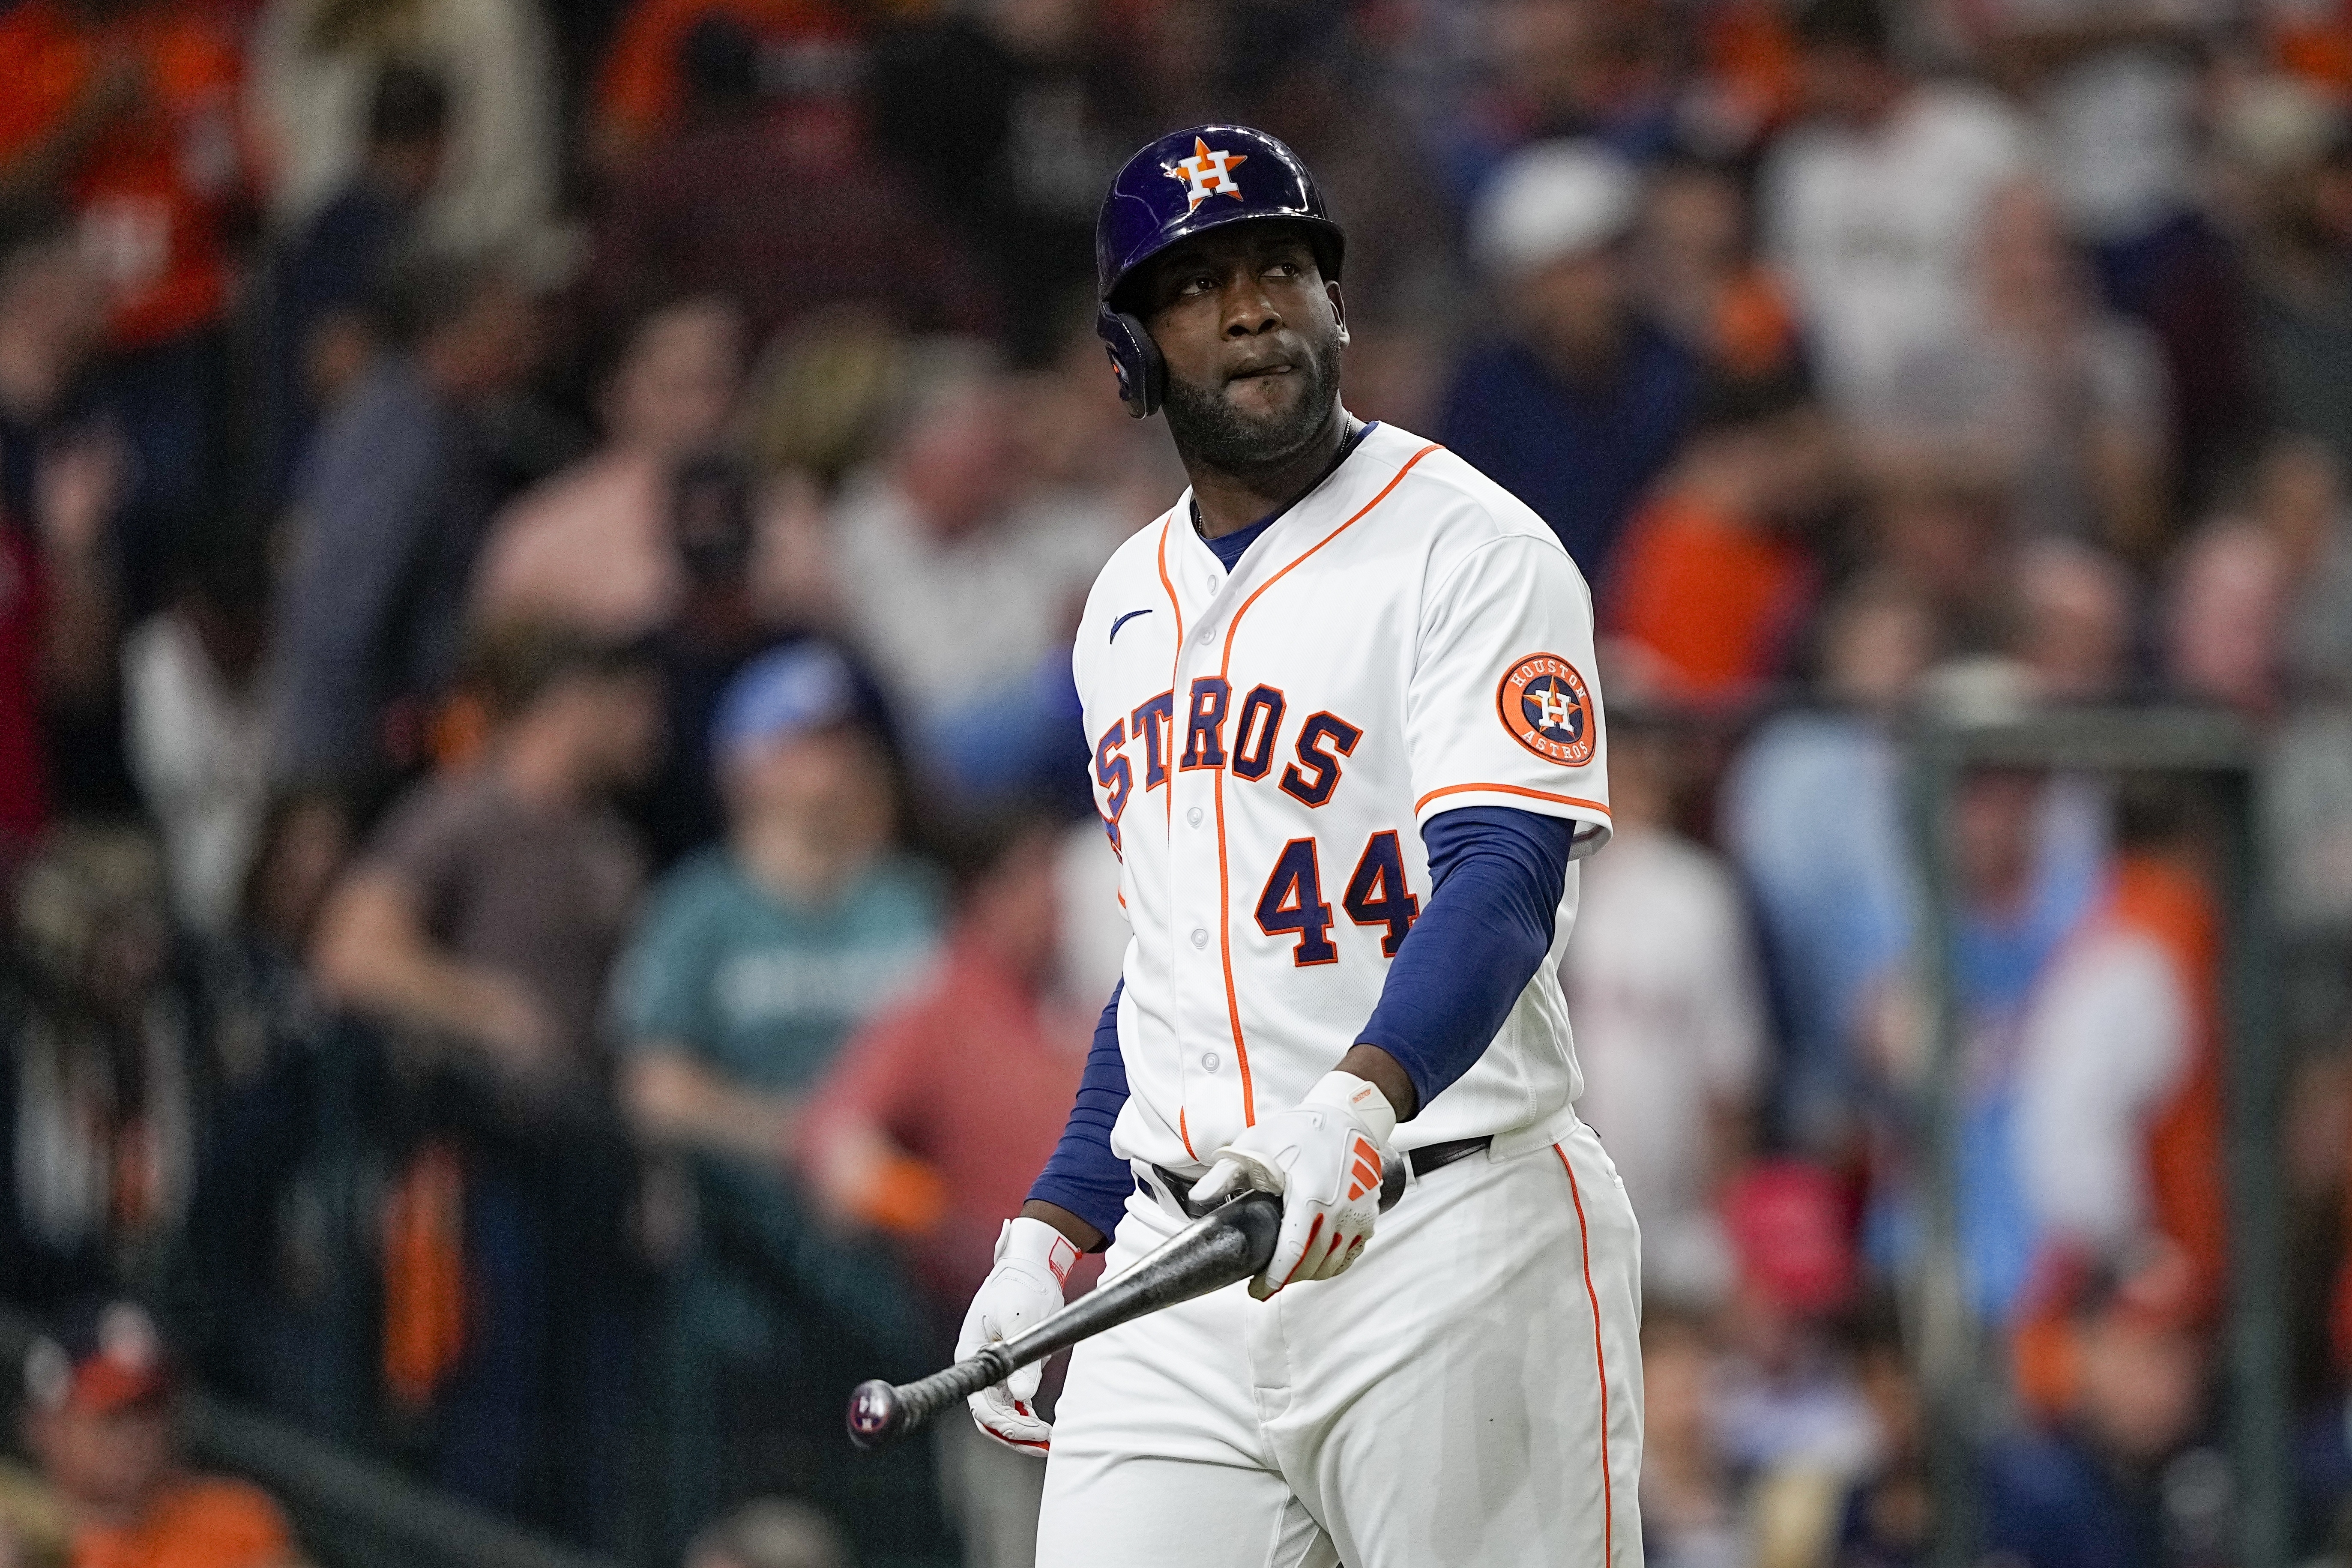 Montgomery shuts out Astros, Taveras homers as Rangers take Game 1 of ALCS